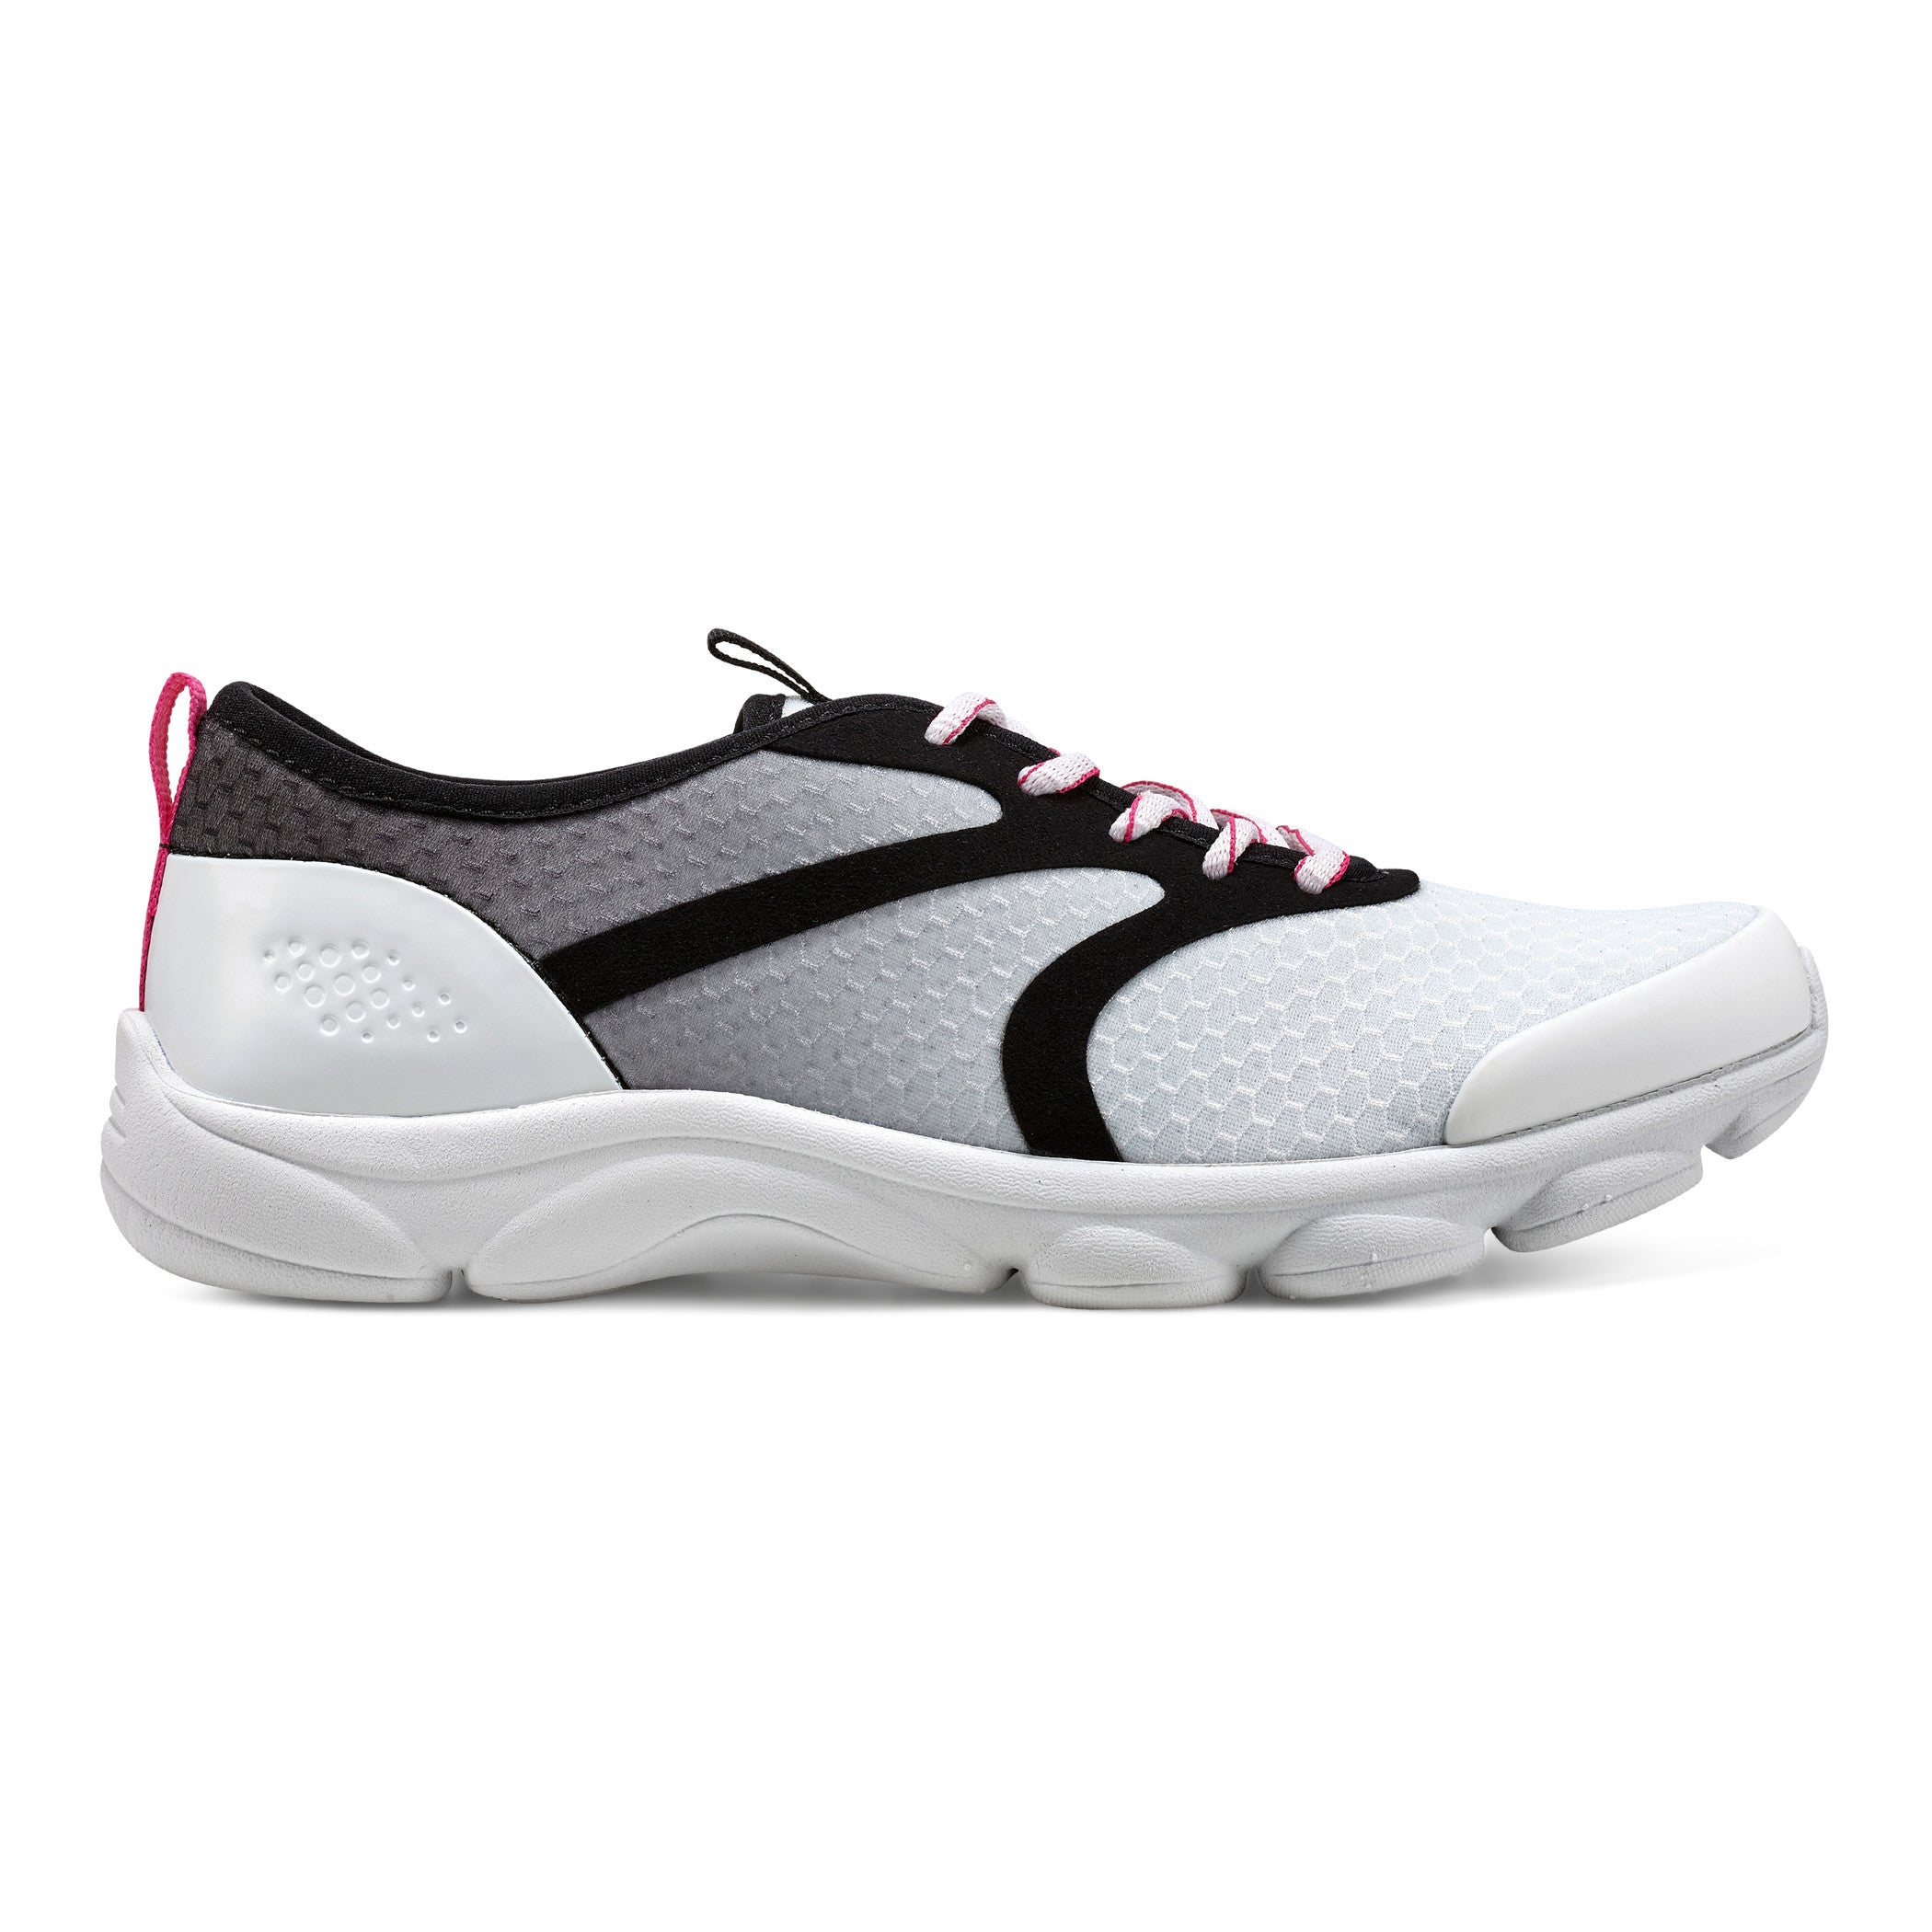 Puma Shoes Rs - Buy Puma Shoes Rs online in India | Myntra